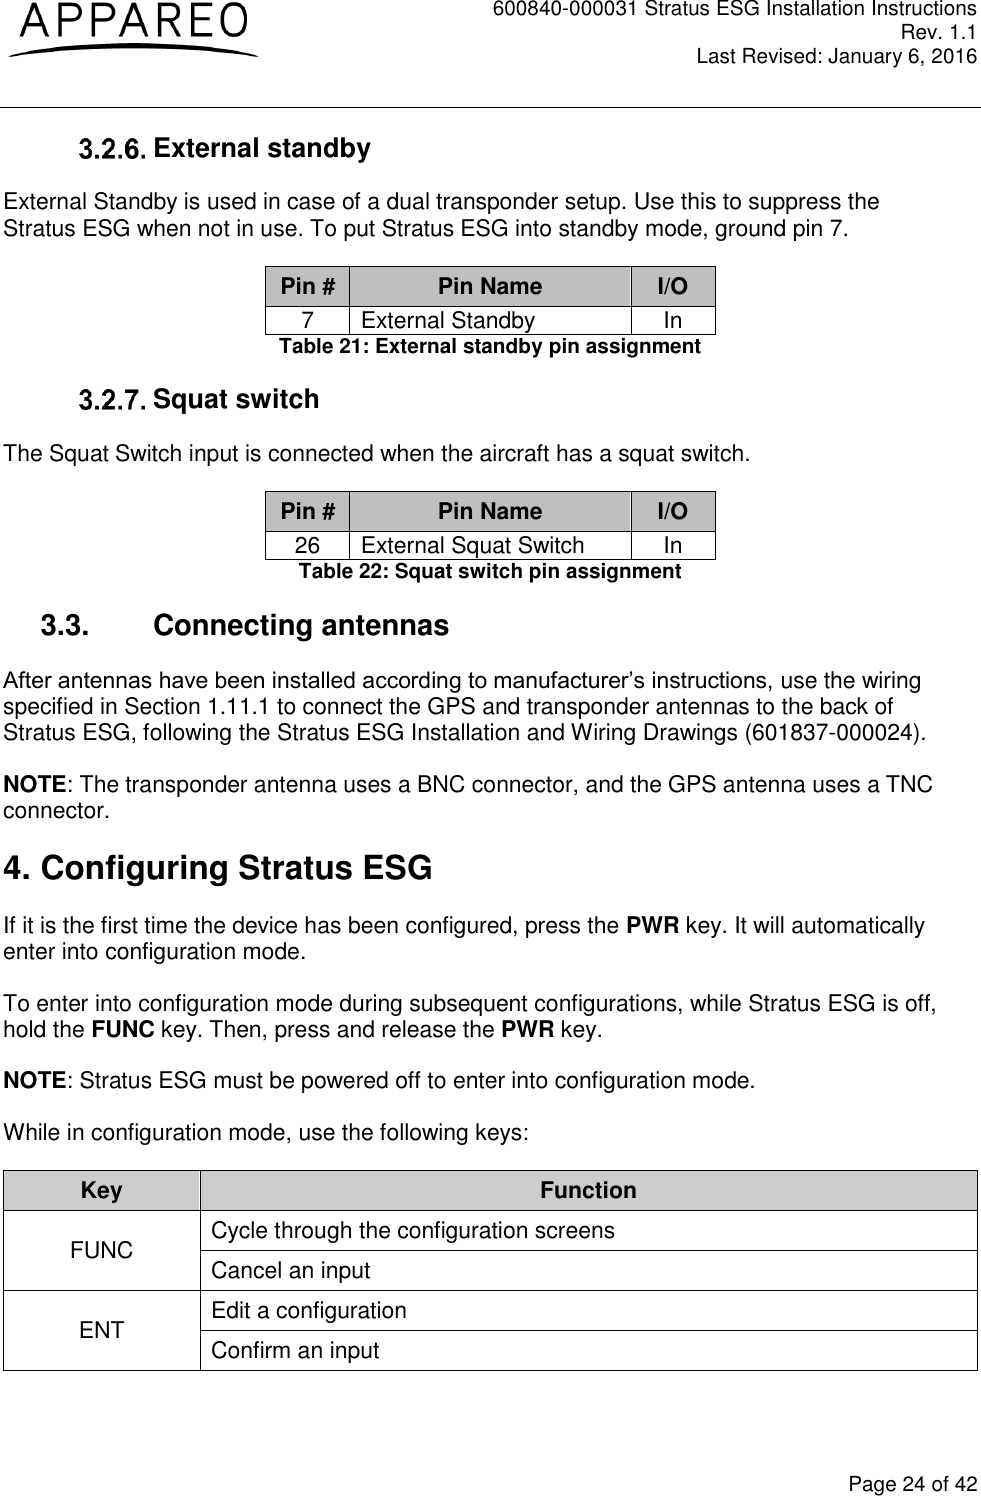 600840-000031 Stratus ESG Installation Instructions Rev. 1.1 Last Revised: January 6, 2016  Page 24 of 42  External standby External Standby is used in case of a dual transponder setup. Use this to suppress the Stratus ESG when not in use. To put Stratus ESG into standby mode, ground pin 7. Pin # Pin Name I/O 7 External Standby In Table 21: External standby pin assignment  Squat switch The Squat Switch input is connected when the aircraft has a squat switch. Pin # Pin Name I/O 26 External Squat Switch In Table 22: Squat switch pin assignment 3.3.  Connecting antennas After antennas have been installed according to manufacturer’s instructions, use the wiring specified in Section 1.11.1 to connect the GPS and transponder antennas to the back of Stratus ESG, following the Stratus ESG Installation and Wiring Drawings (601837-000024). NOTE: The transponder antenna uses a BNC connector, and the GPS antenna uses a TNC connector. 4. Configuring Stratus ESG If it is the first time the device has been configured, press the PWR key. It will automatically enter into configuration mode. To enter into configuration mode during subsequent configurations, while Stratus ESG is off, hold the FUNC key. Then, press and release the PWR key. NOTE: Stratus ESG must be powered off to enter into configuration mode. While in configuration mode, use the following keys: Key Function FUNC Cycle through the configuration screens Cancel an input ENT Edit a configuration Confirm an input 